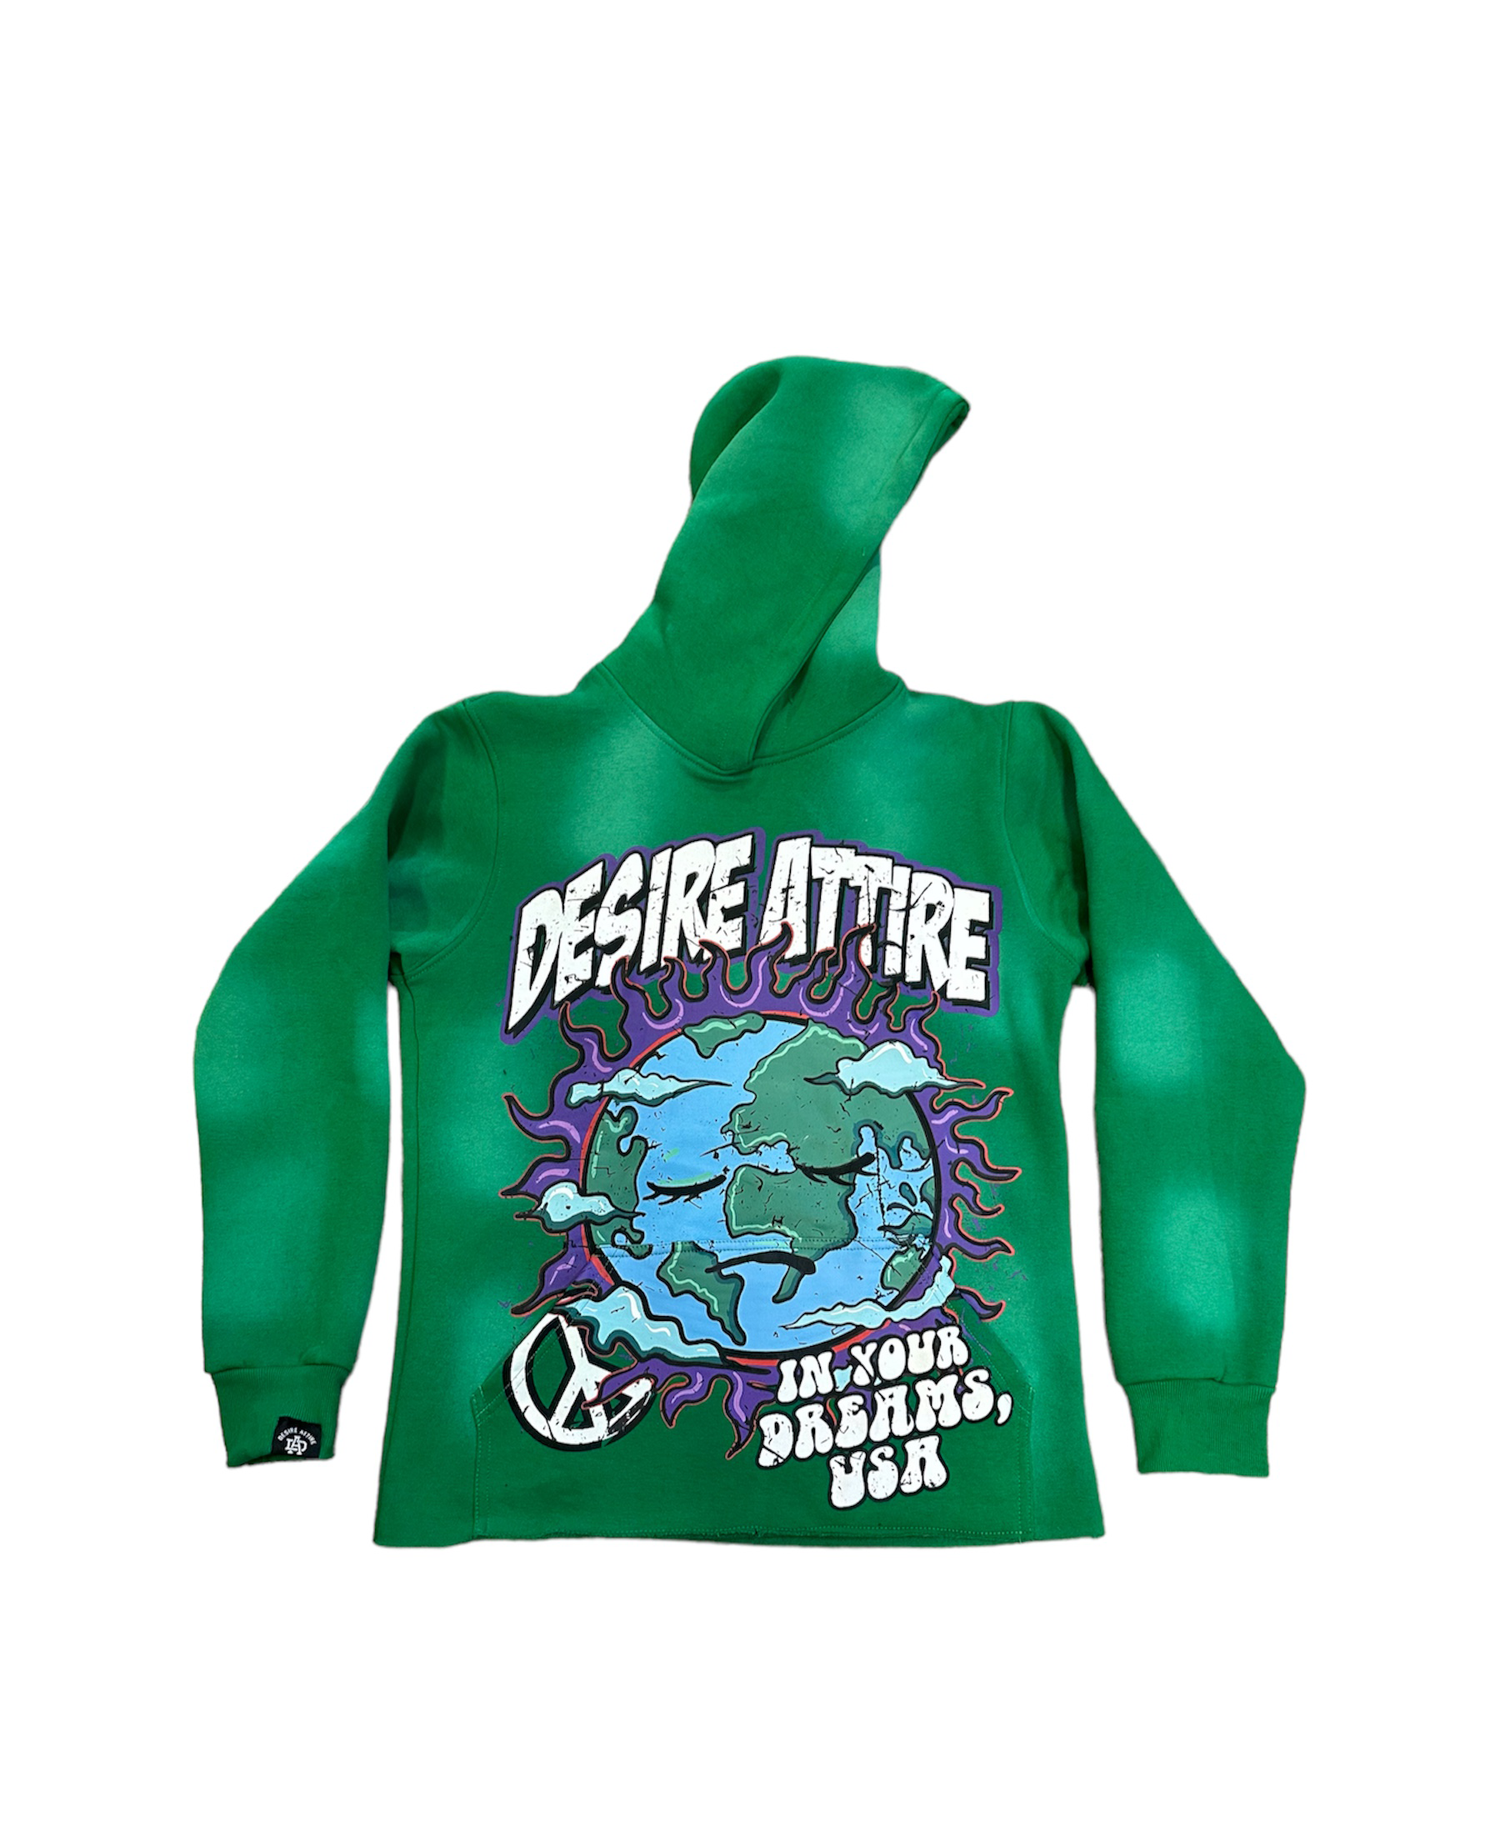 IN YOUR DREAMS, USA (GREEN HOODIE)